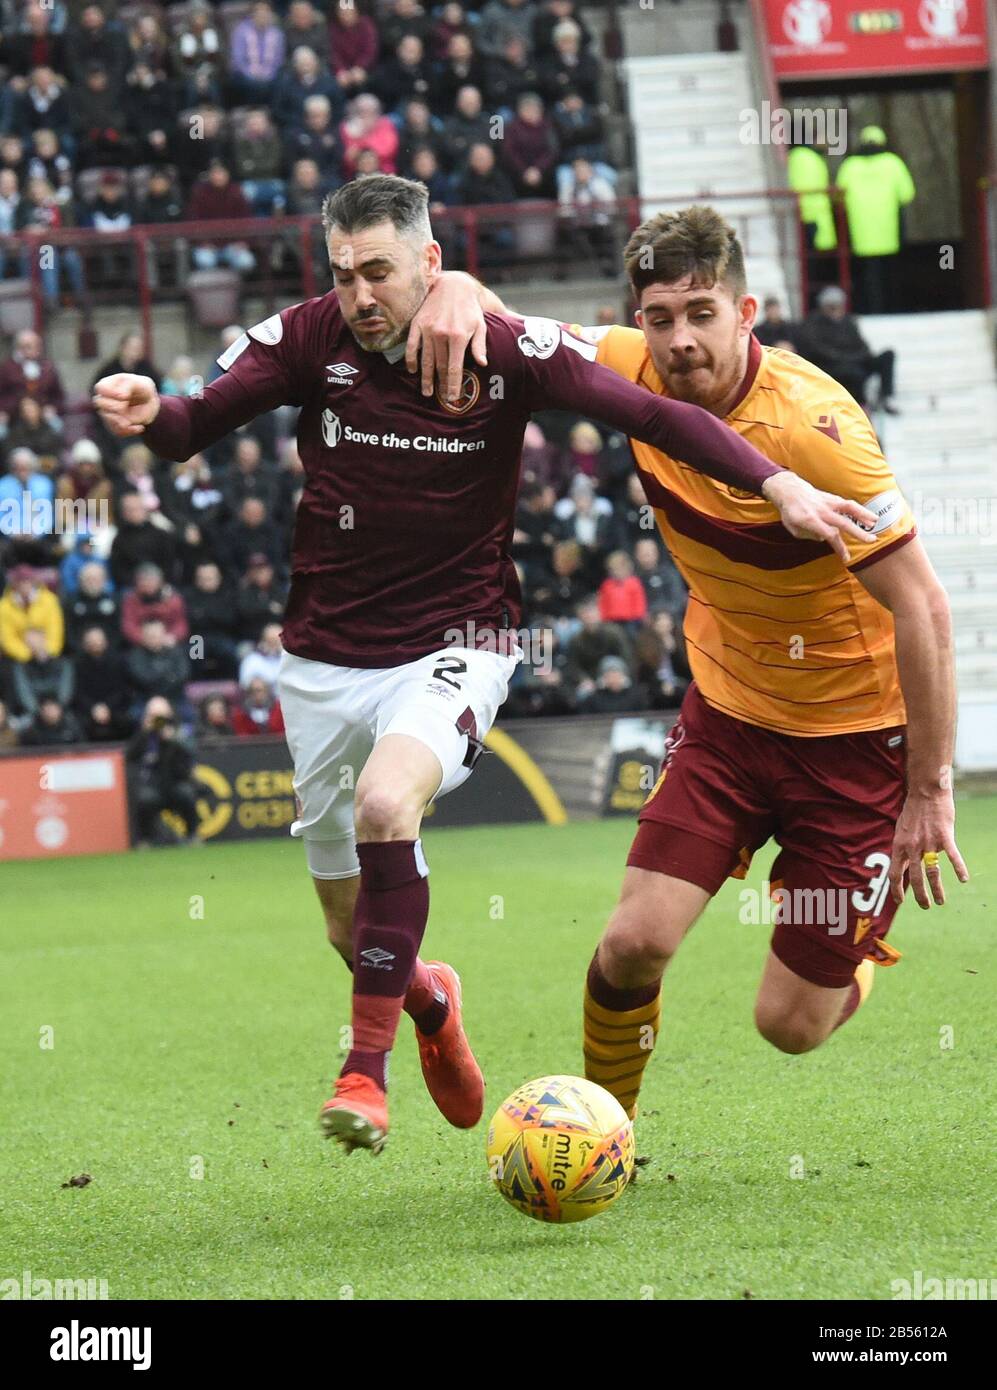 Tynecastle Park .Edinburgh.Scotland.Uk 7th March 20 Scottish Premiership Hearts v Motherwell. L/r Hearts Michael Smith tussle with Hearts Declan Gallagher Credit: eric mccowat/Alamy Live News Stock Photo